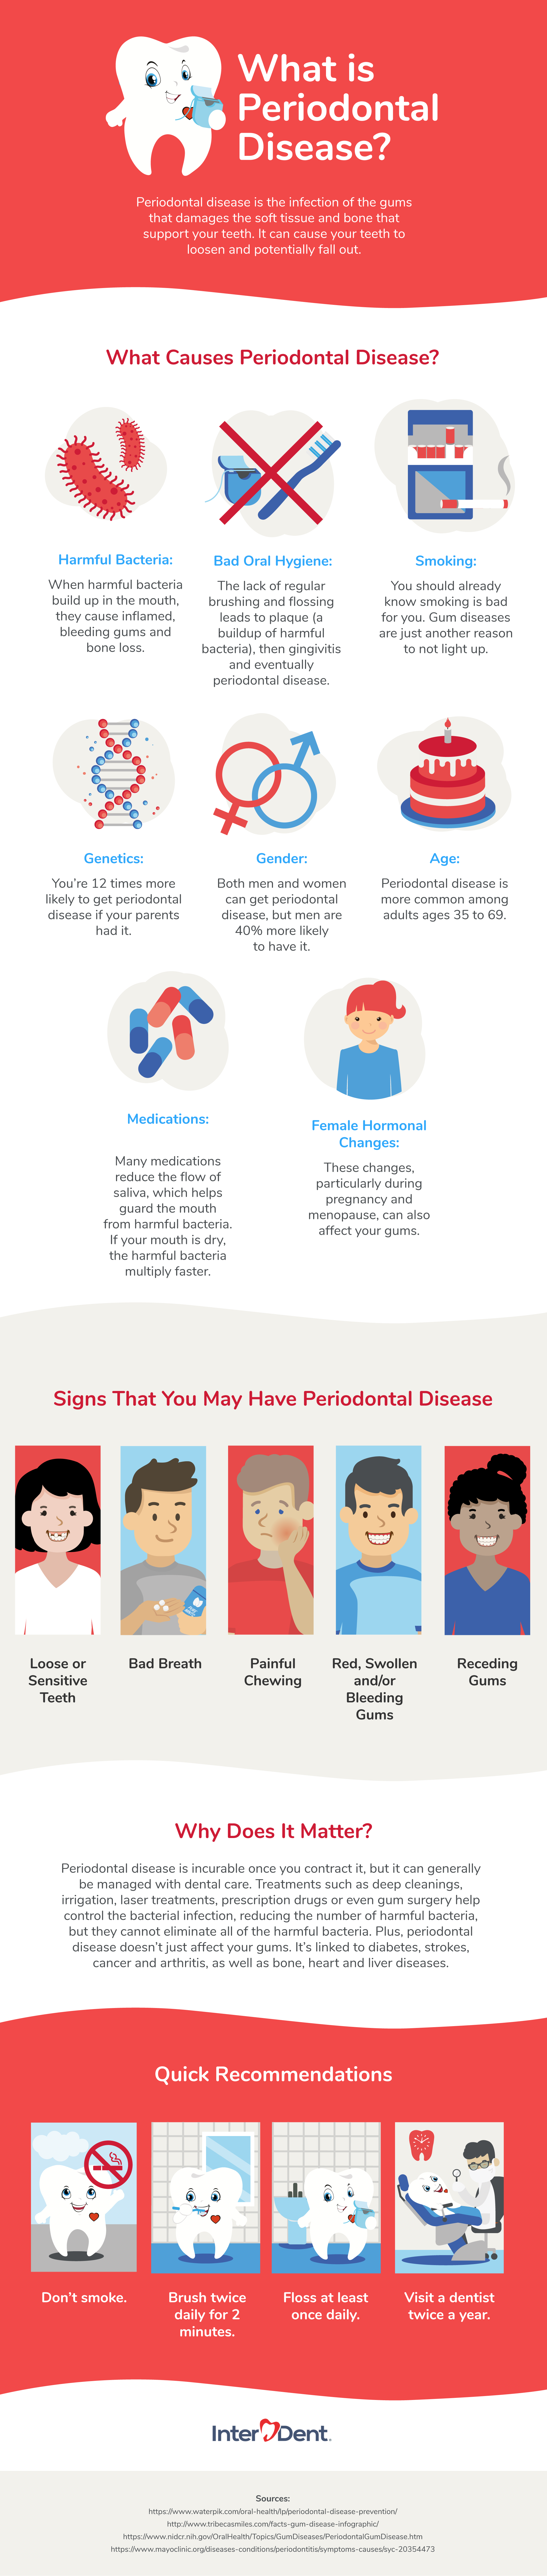 An infographic about periodontal disease!